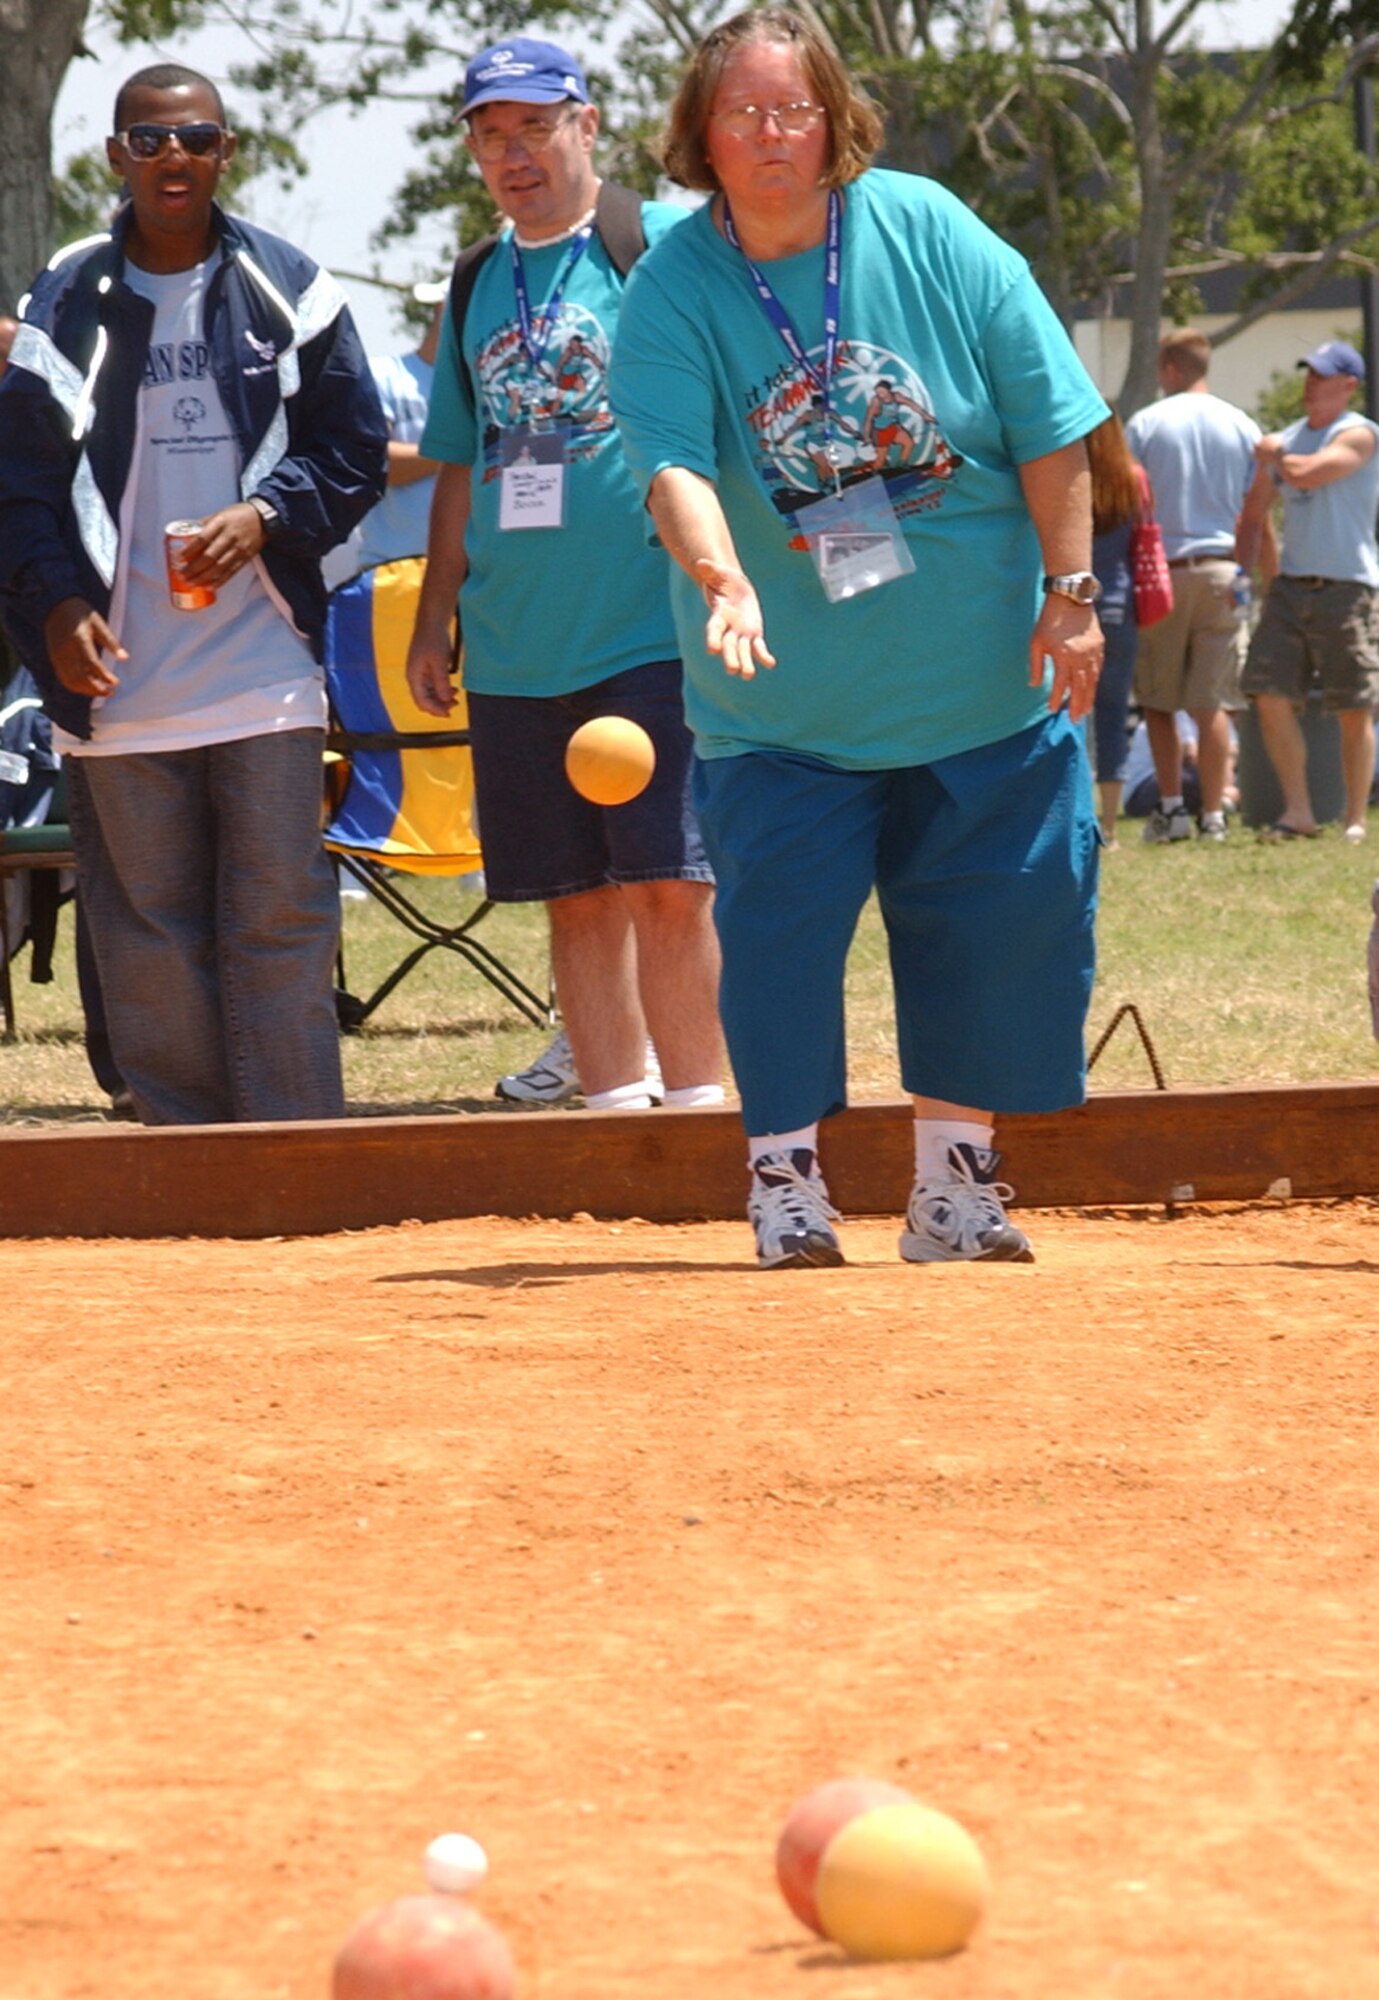 Donna Tillman, Area 12, throws a bocce ball Saturday at the Triangle Track as an Airman sponsor looks on.  Each athlete was assigned two Airman sponsors to bunk with and escort them throughout the weekend. (U. S. Air Force Photo by Kemberly Groue)